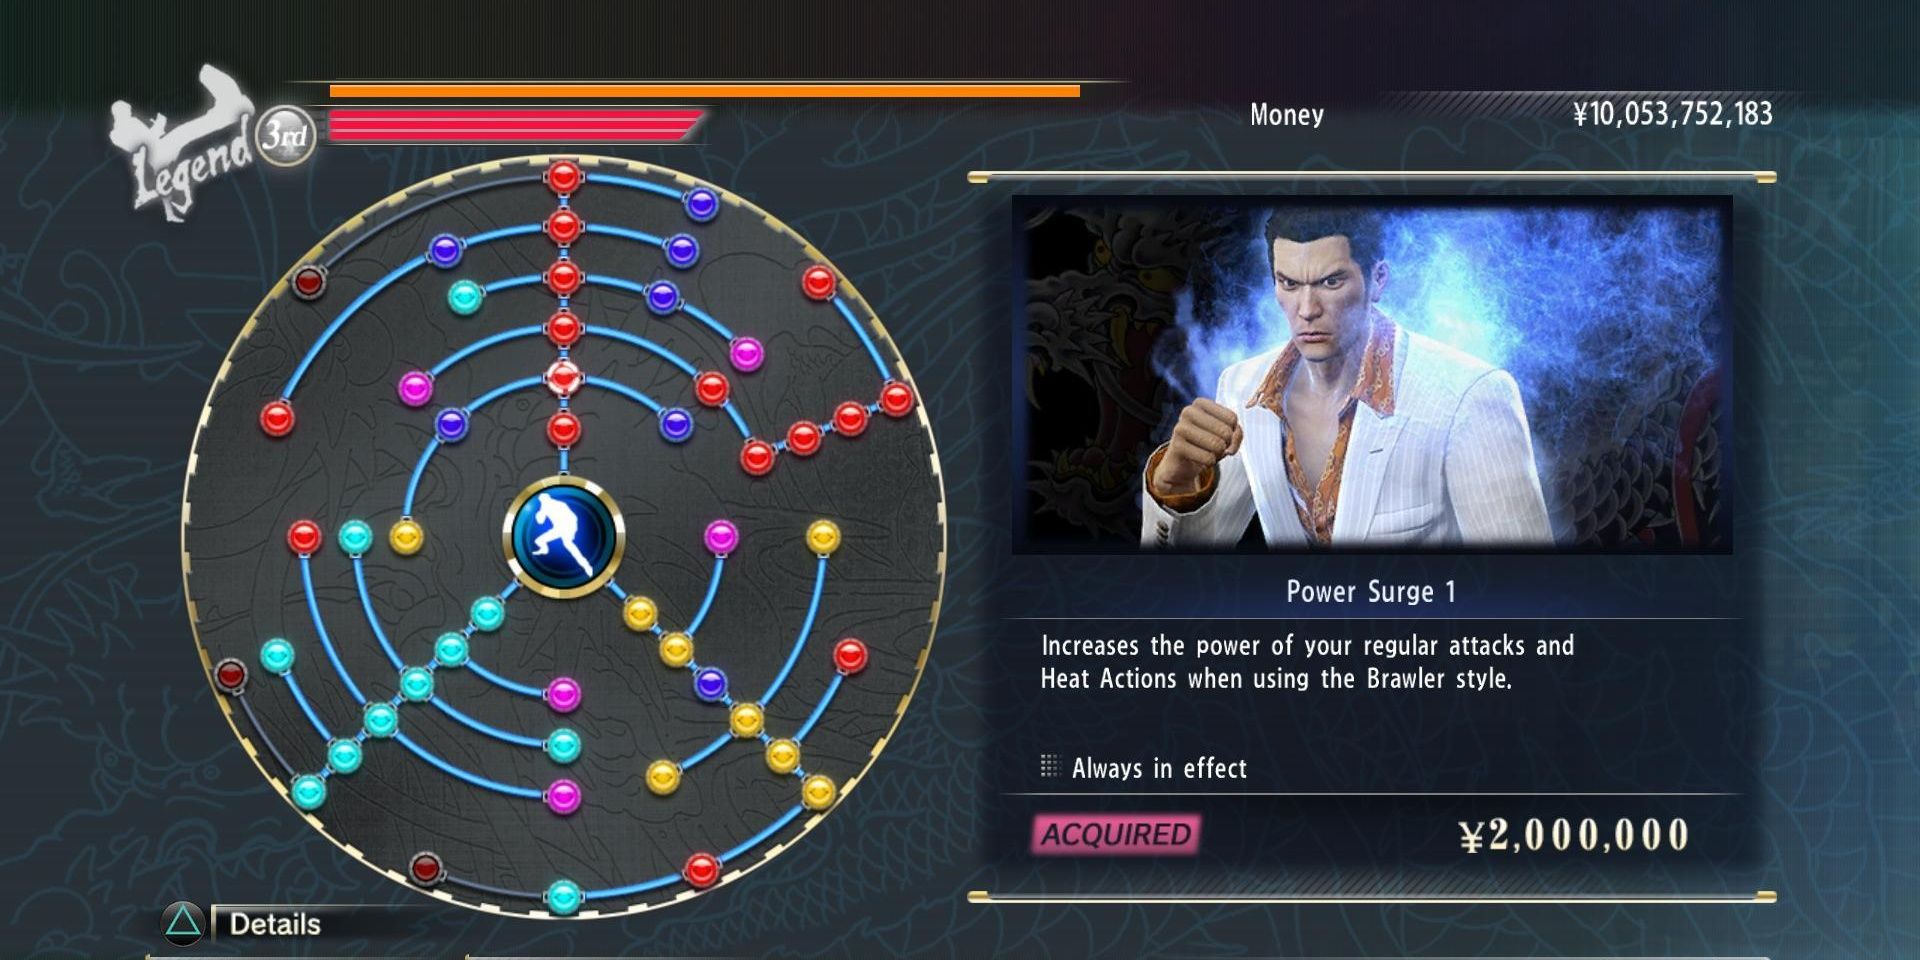 Yakuza 0 Skill Tree of the Legend Battle Style fully complete